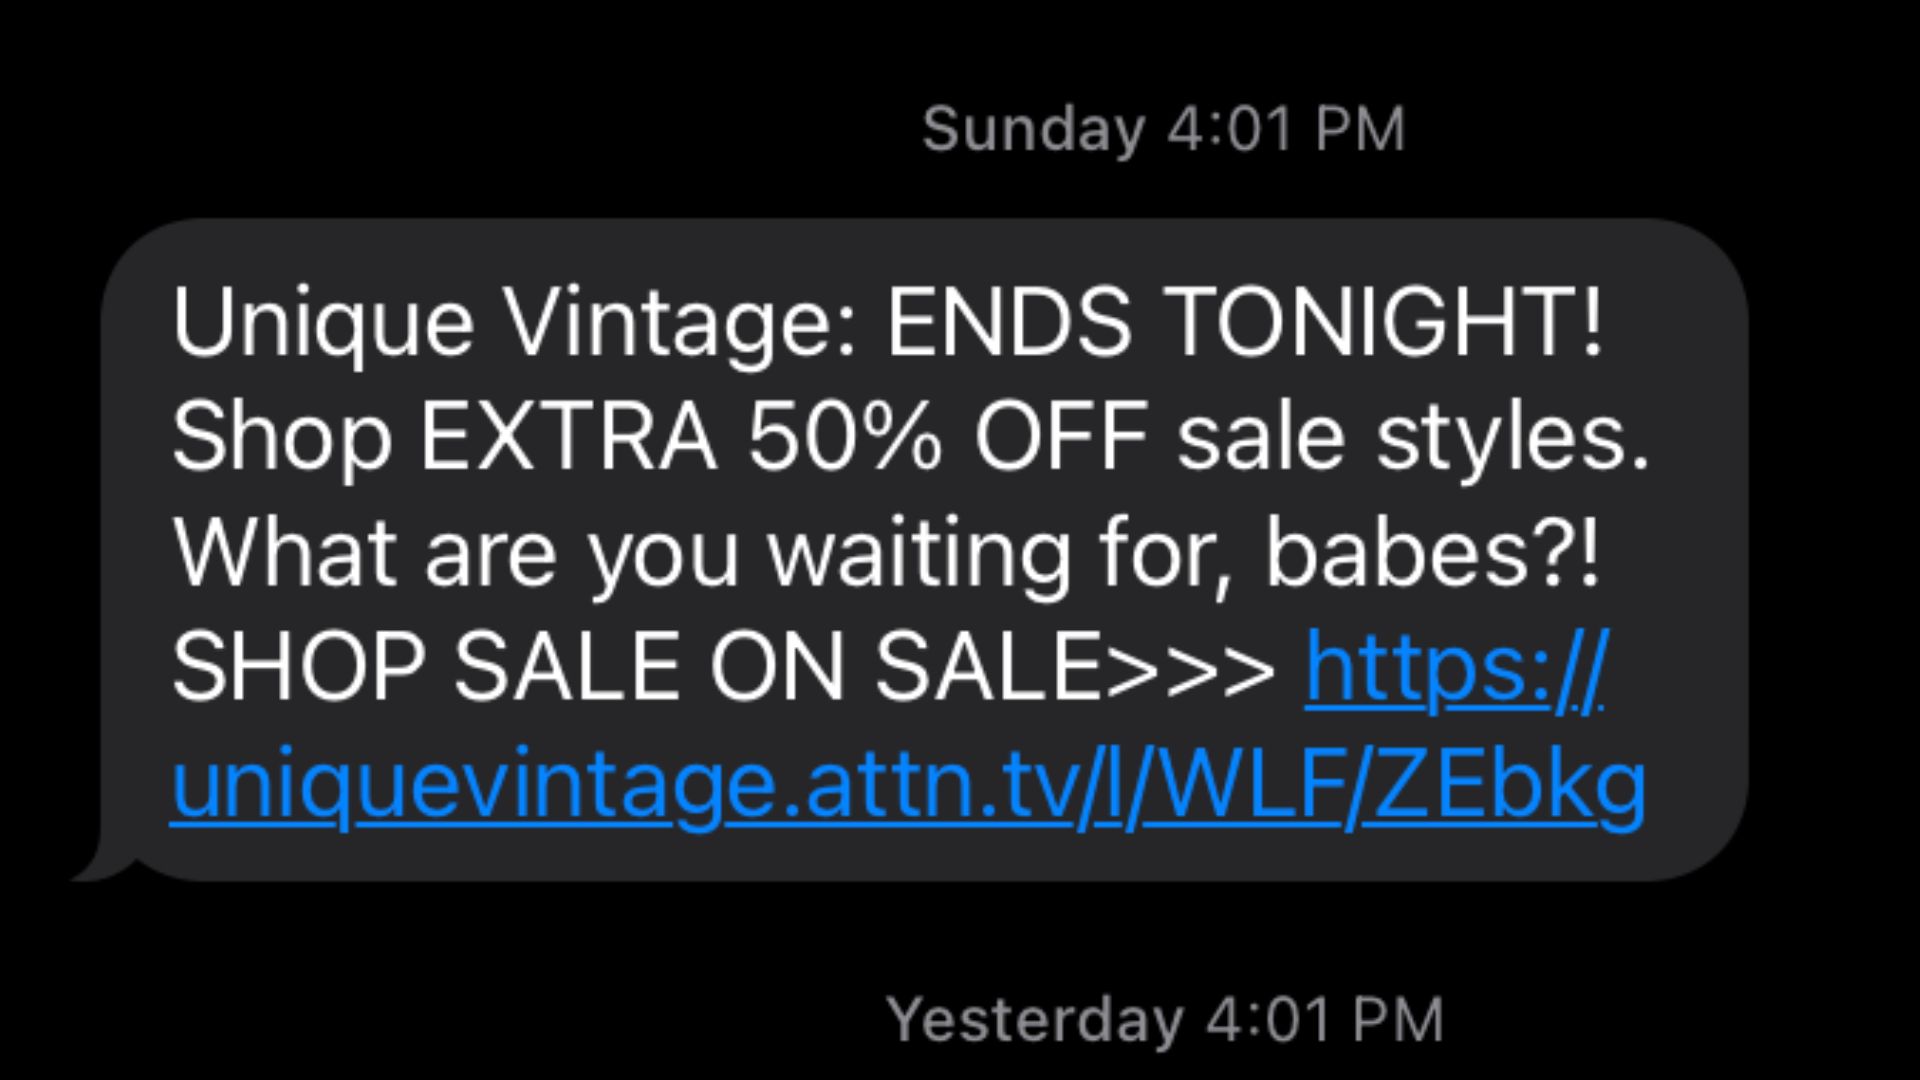 A screenshot of a text message Unique Vintage sent to promote their 50% off sales ending tonight and a link to shop the sale.